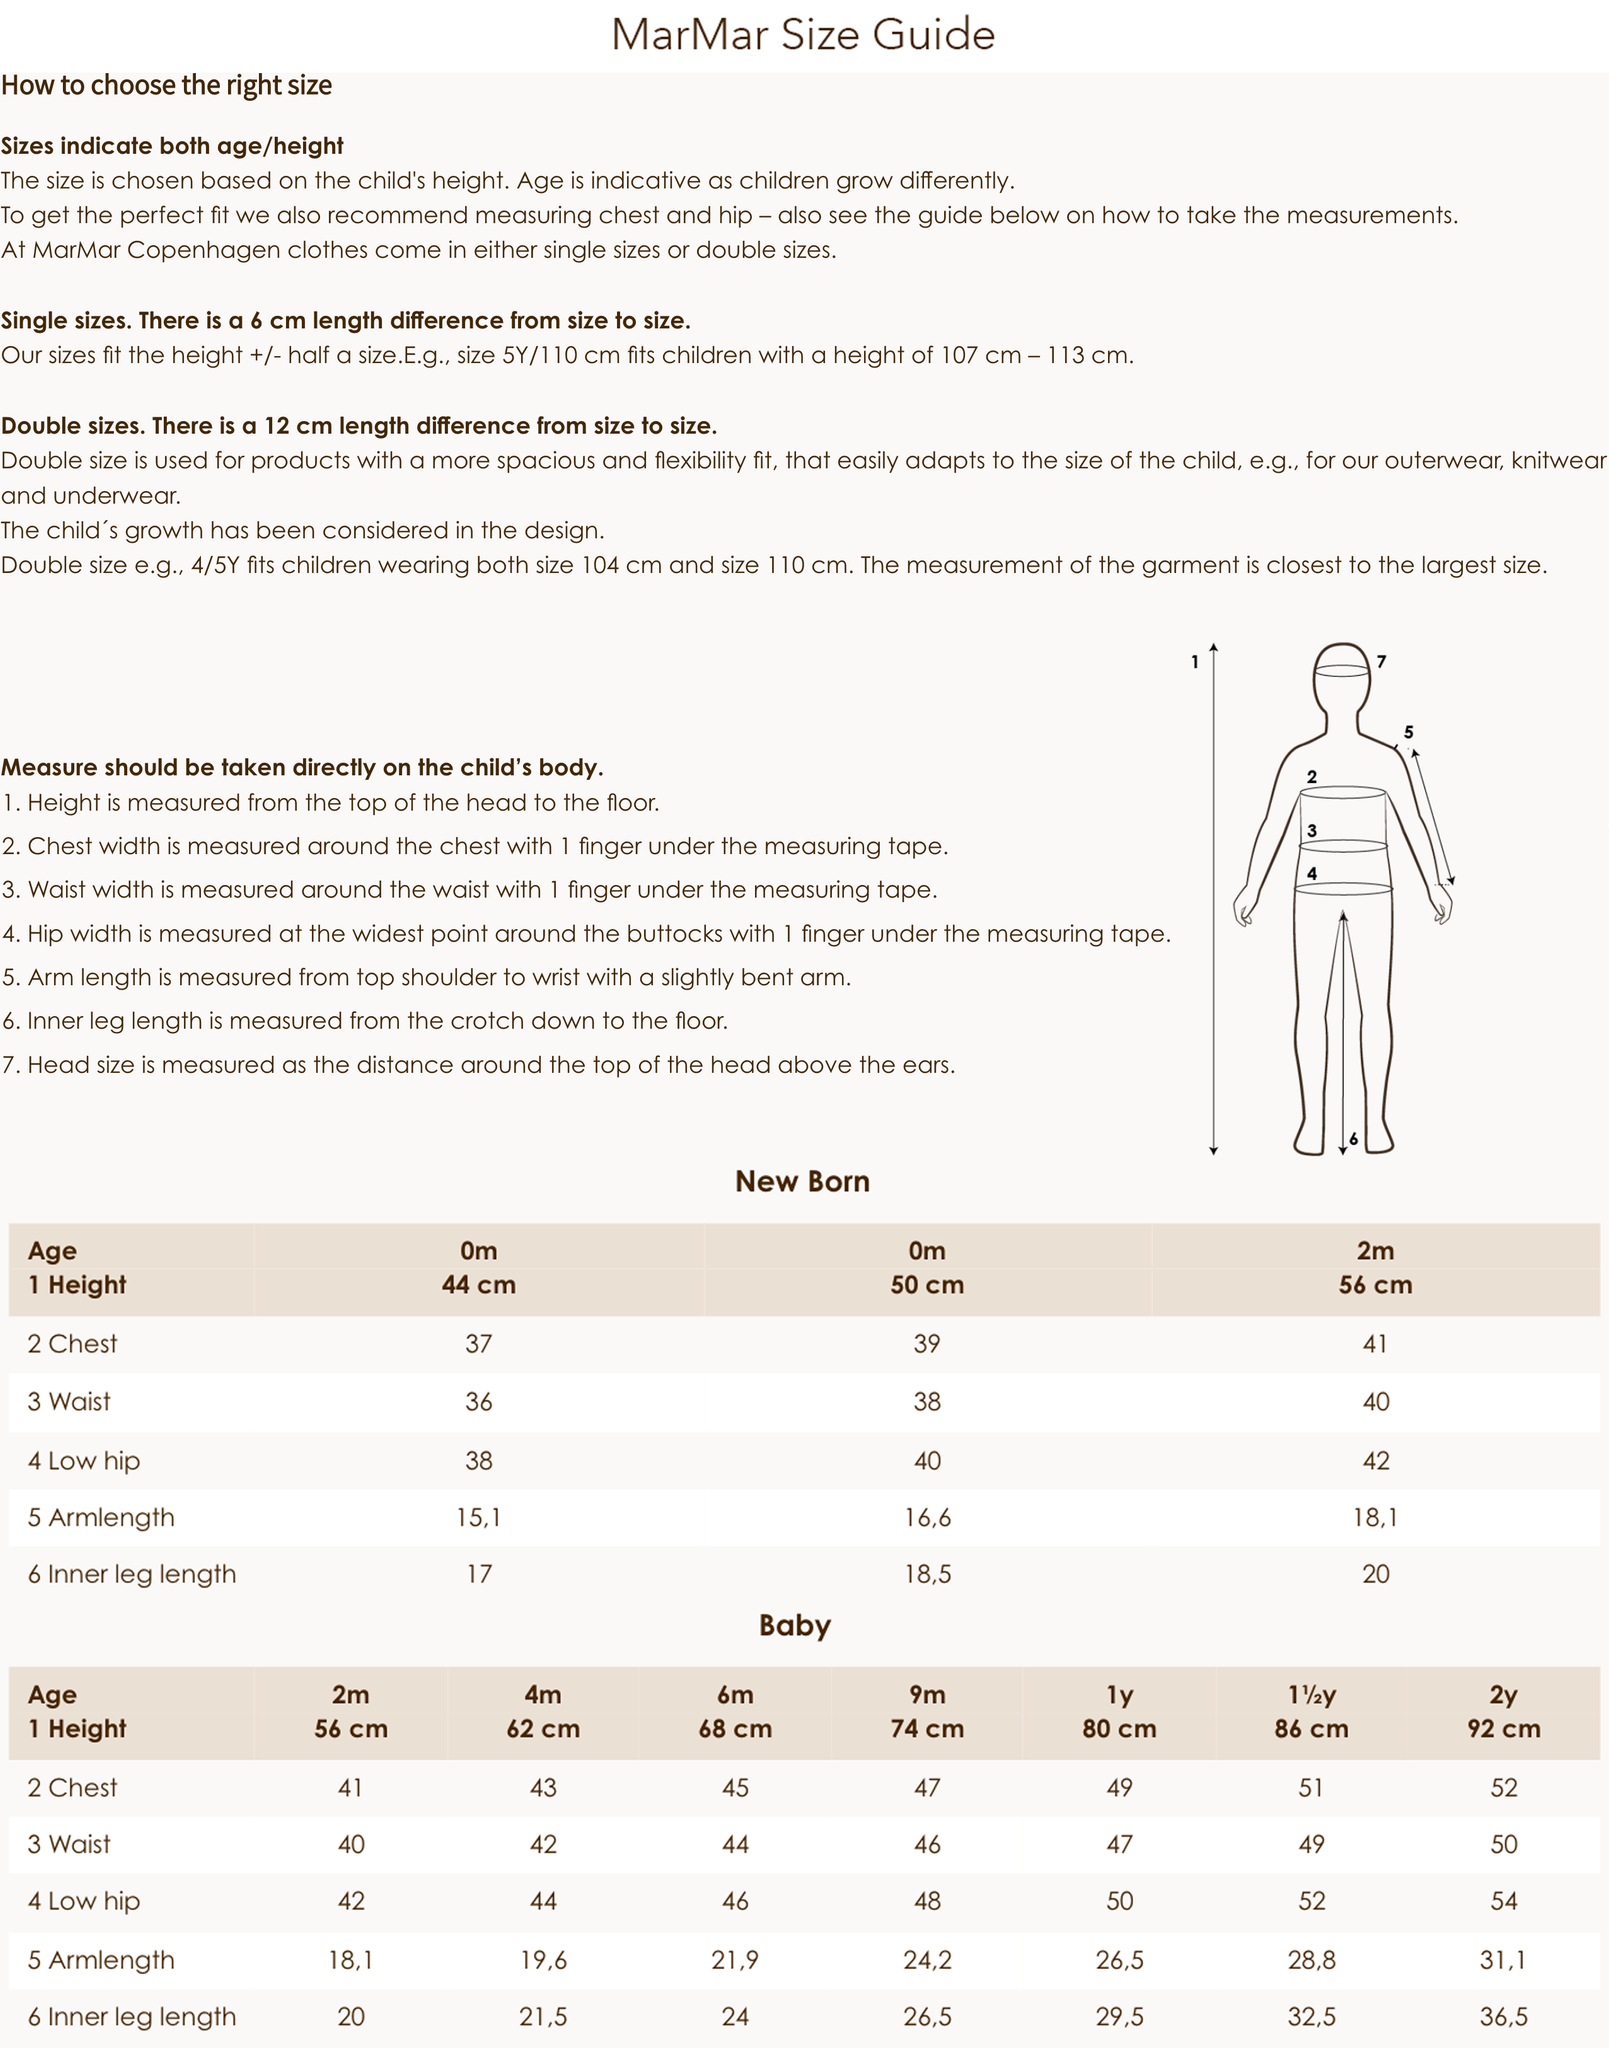 MarMar Baby and newborn Size Guide